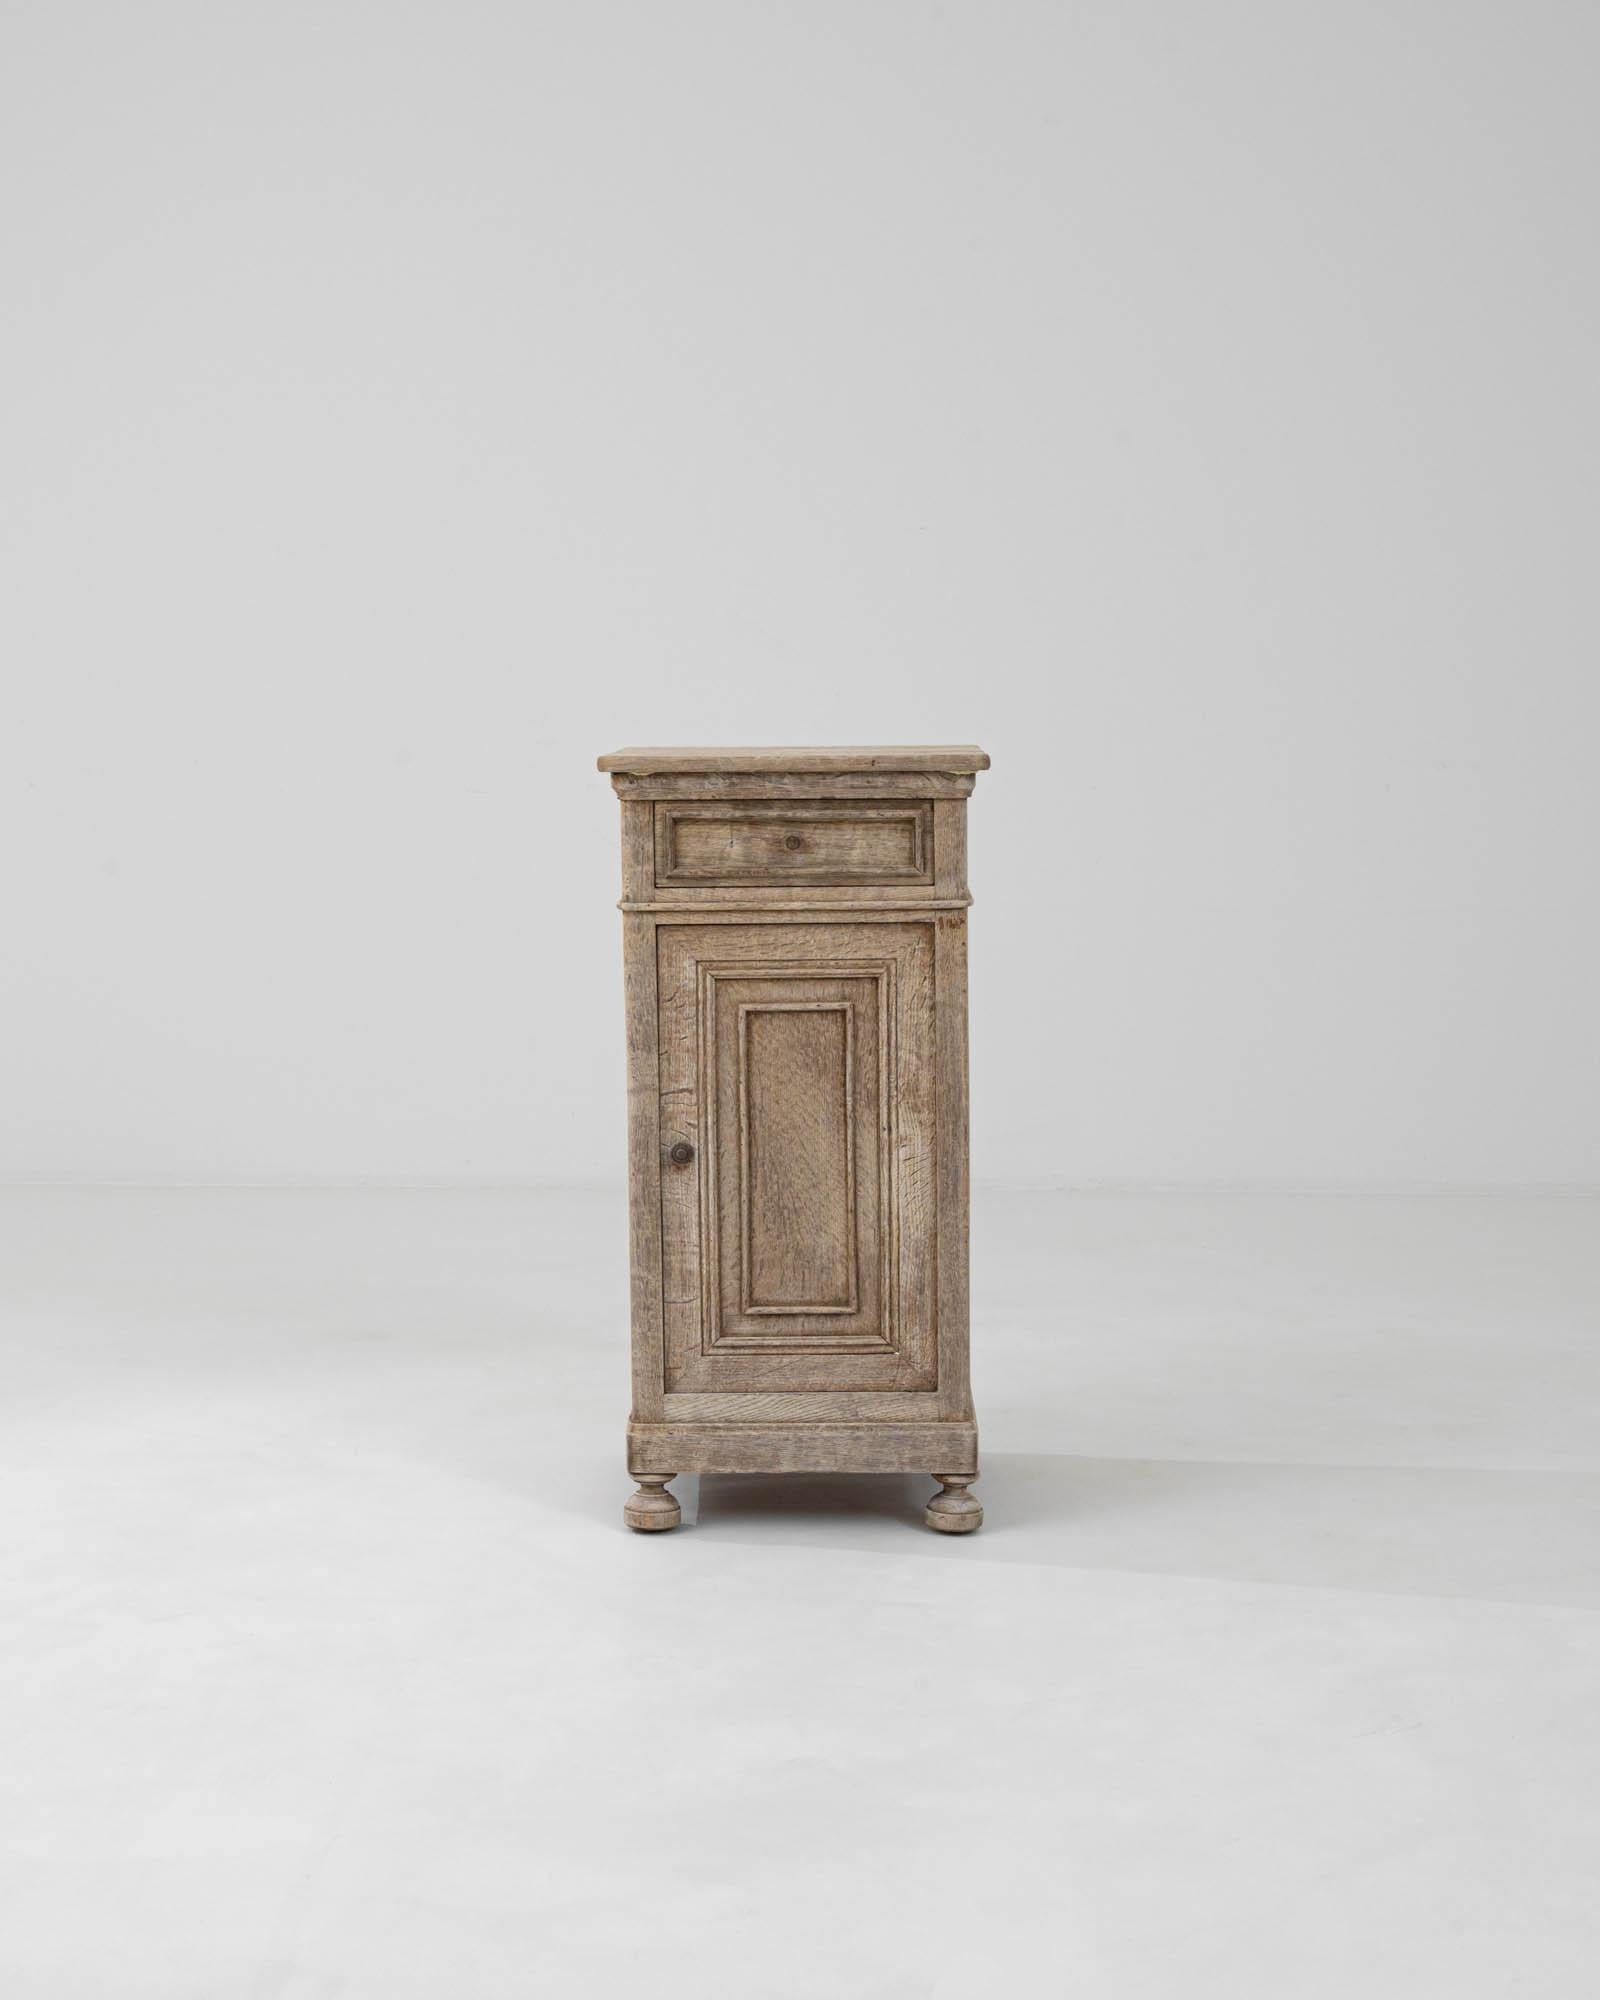 Presenting a charming slice of history with our 1900s French Bleached Oak Bedside Table. This exquisite piece carries the whispers of the past into the present with its beautifully weathered wood and graceful aging. Crafted during a time when